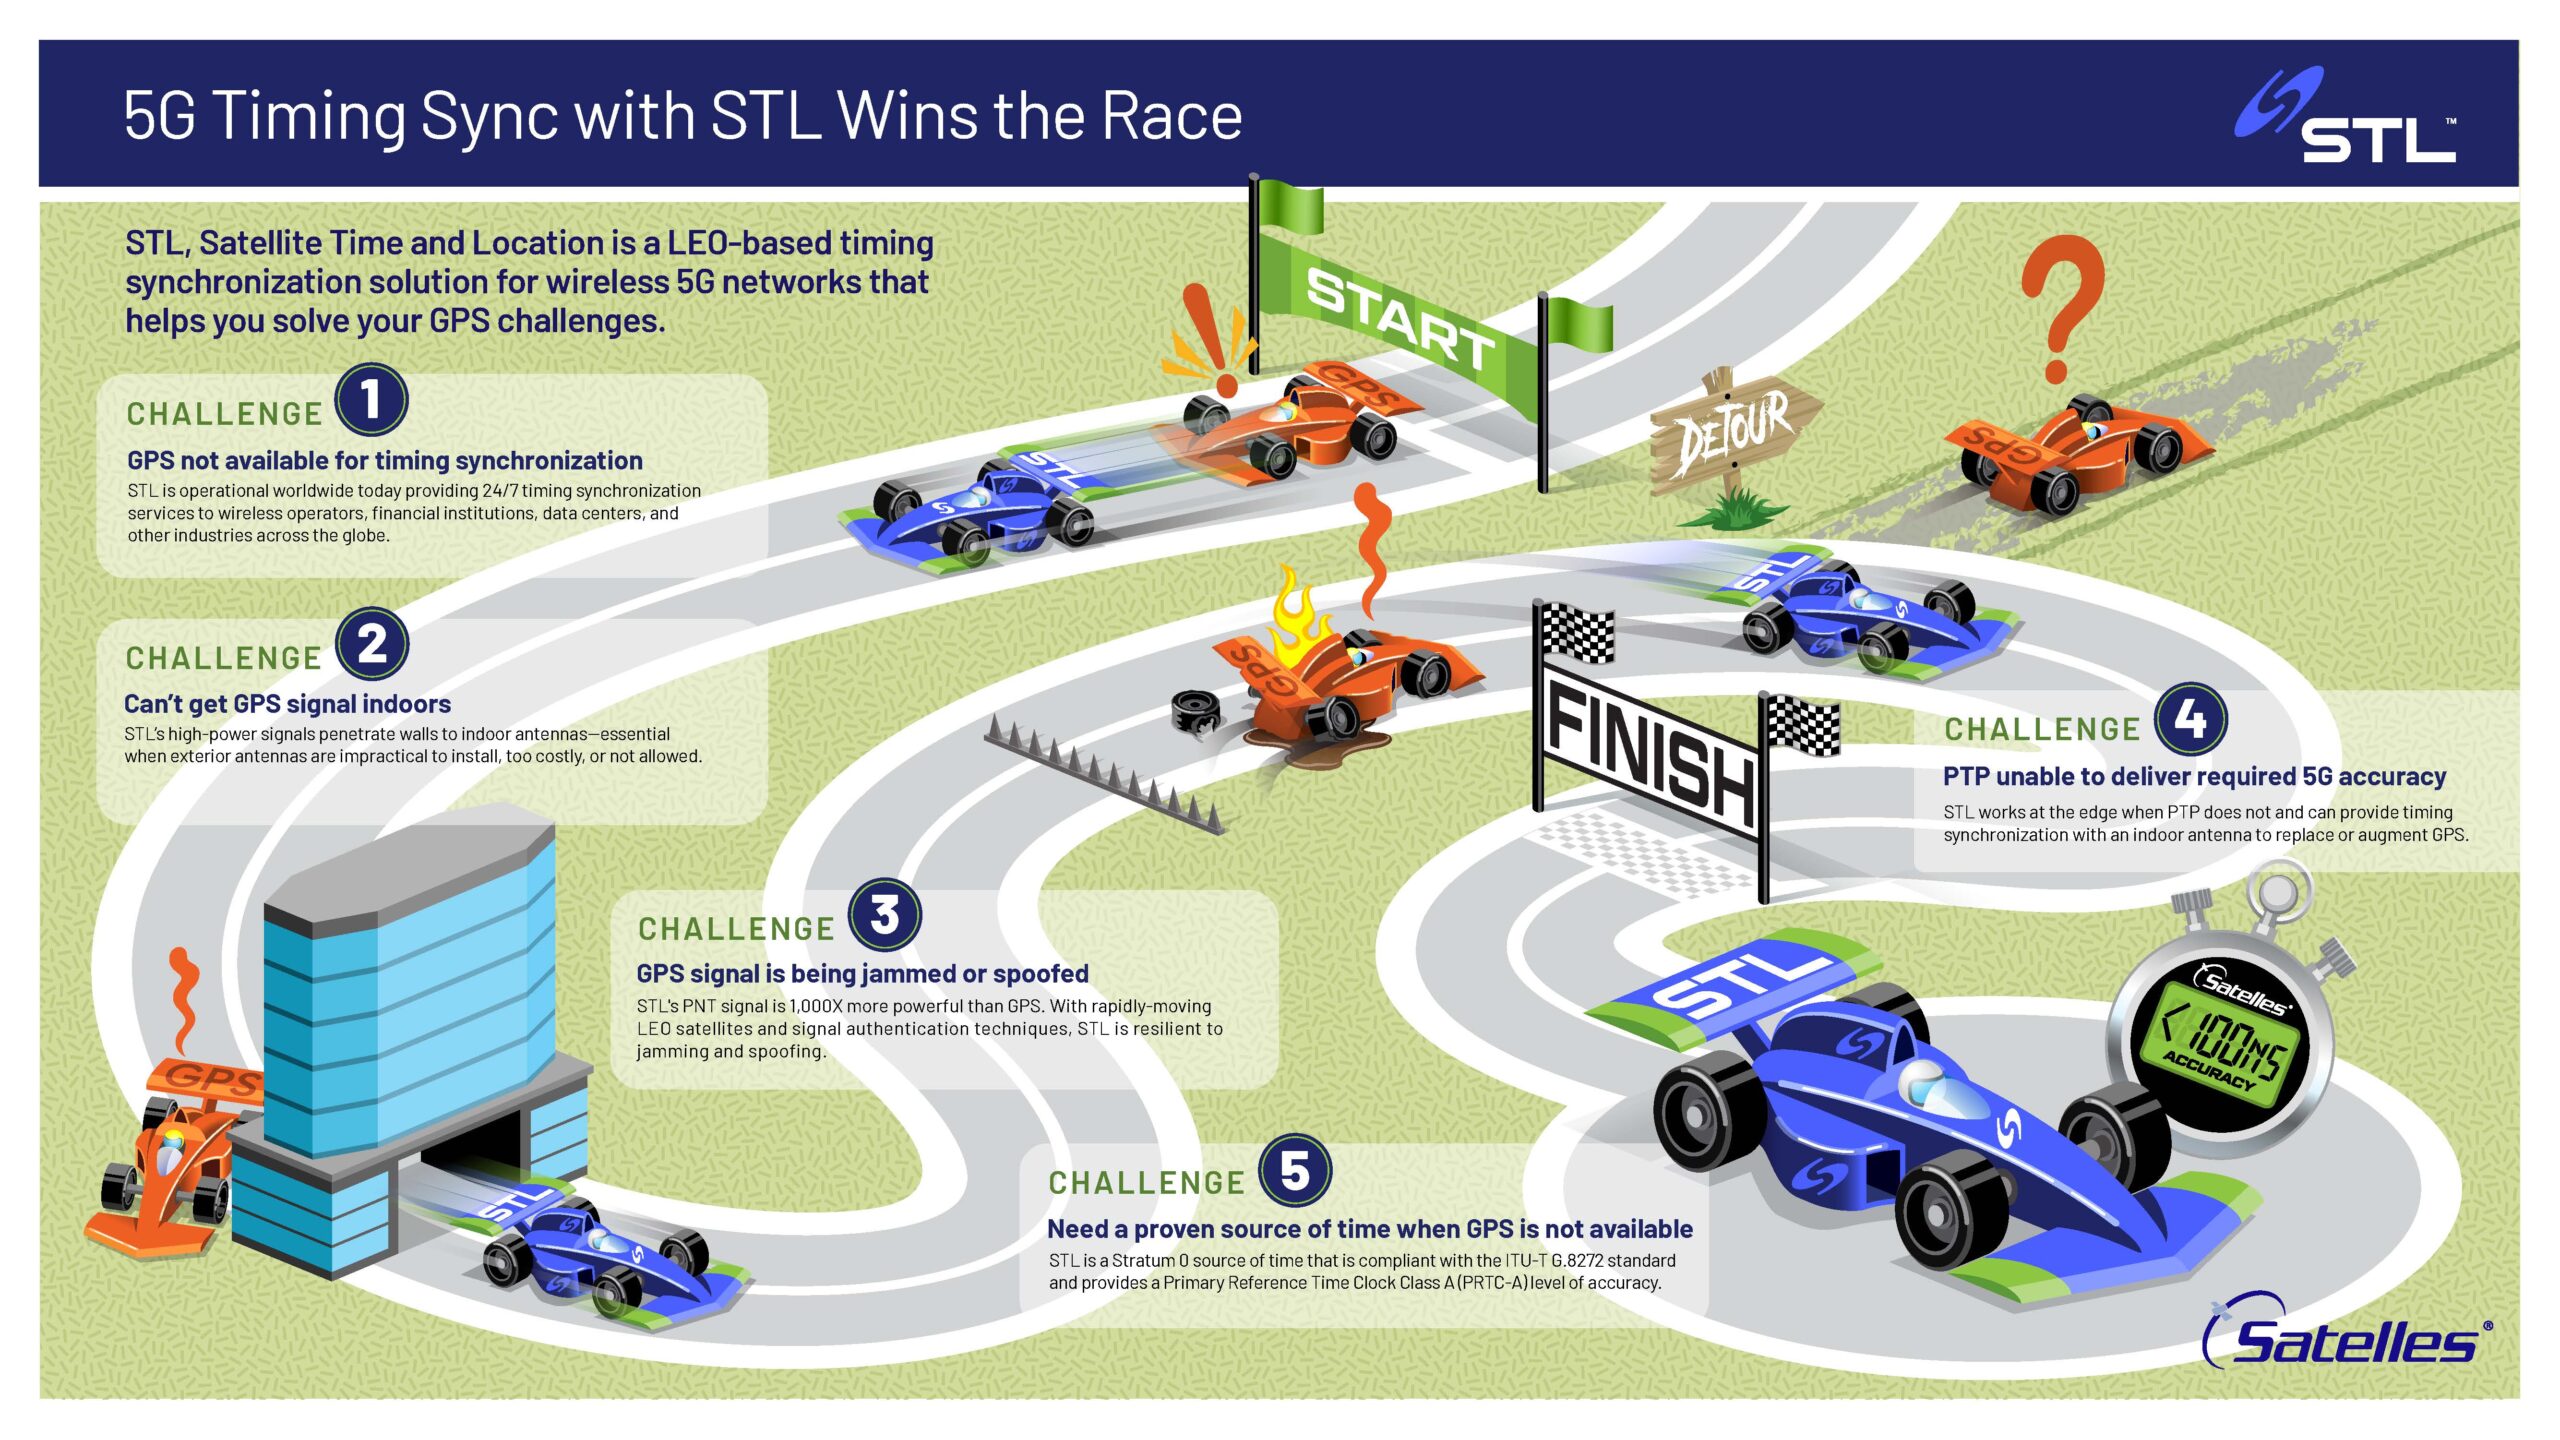 Infographic of a race track with challenges on the track representing challenges with GPS/GNSS for timing synchronization for wireless networks.